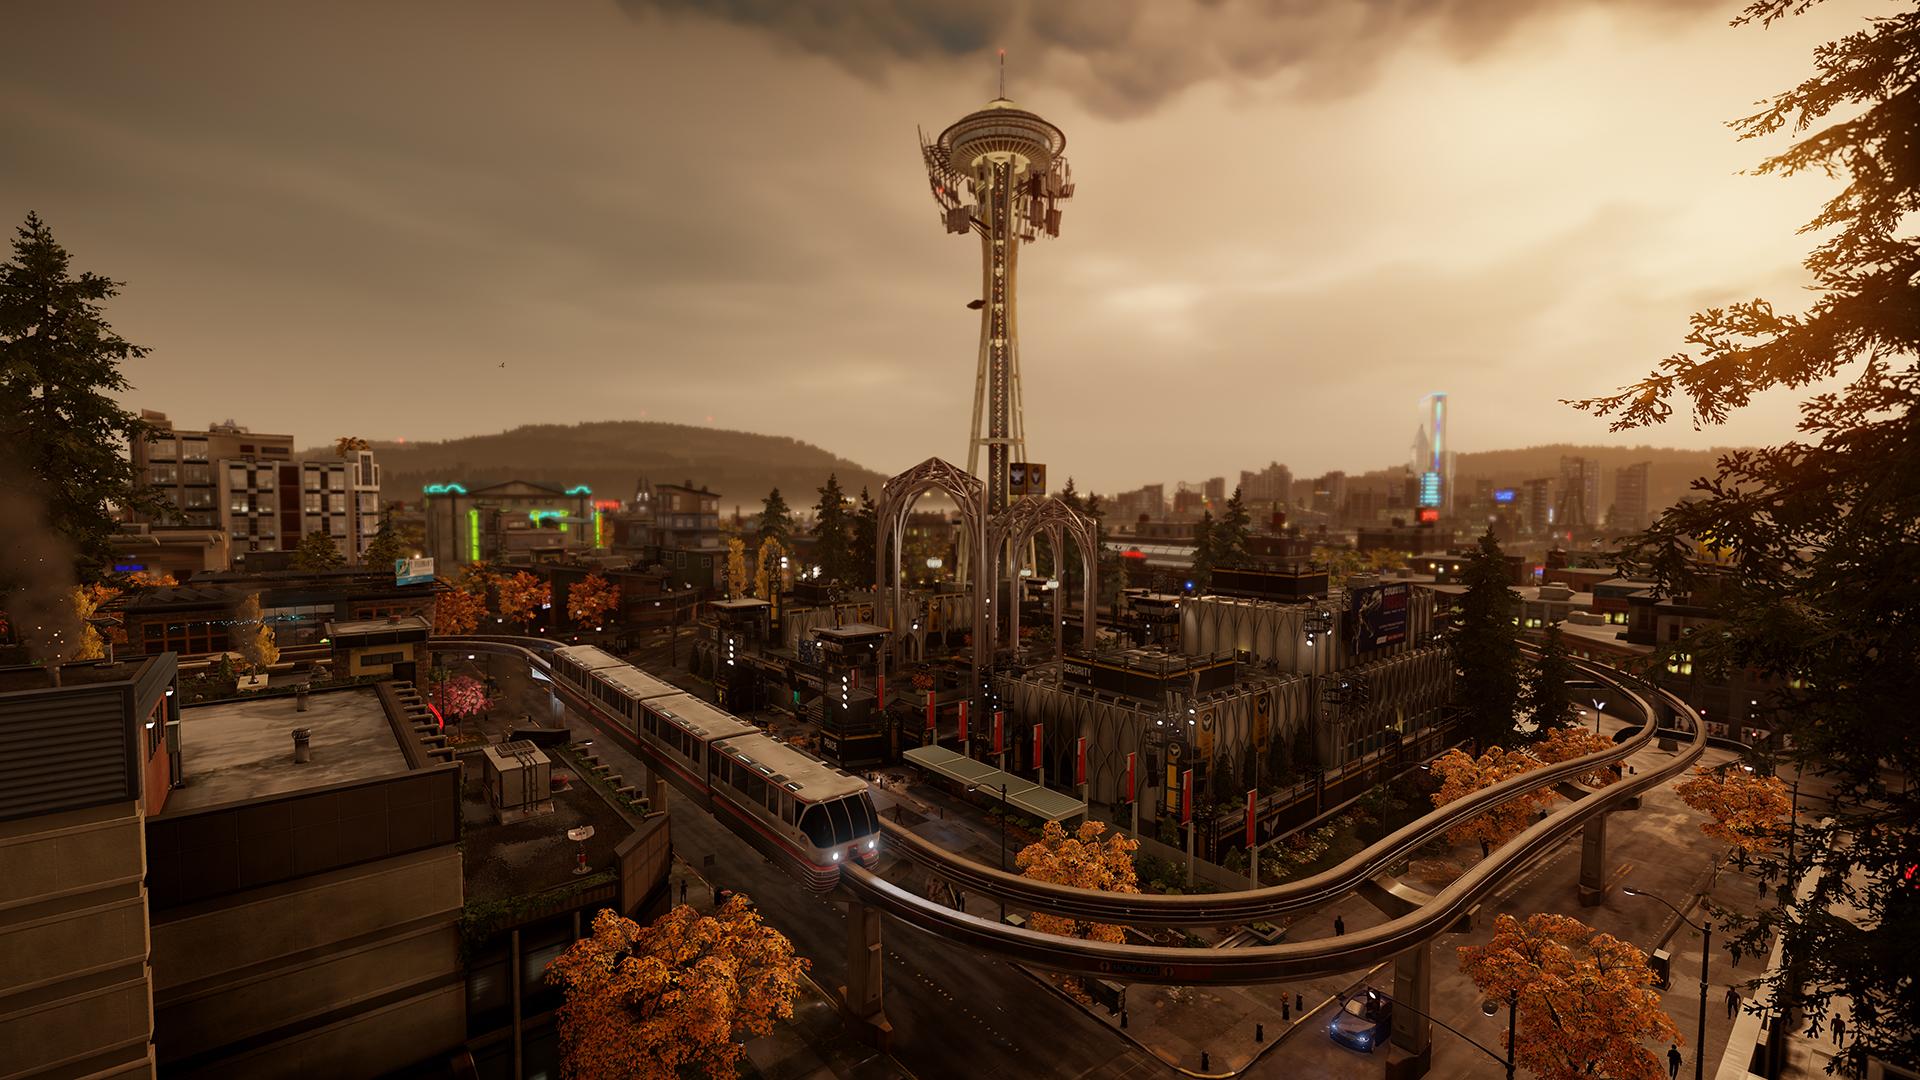 View Larger - Infamous Second Son City , HD Wallpaper & Backgrounds